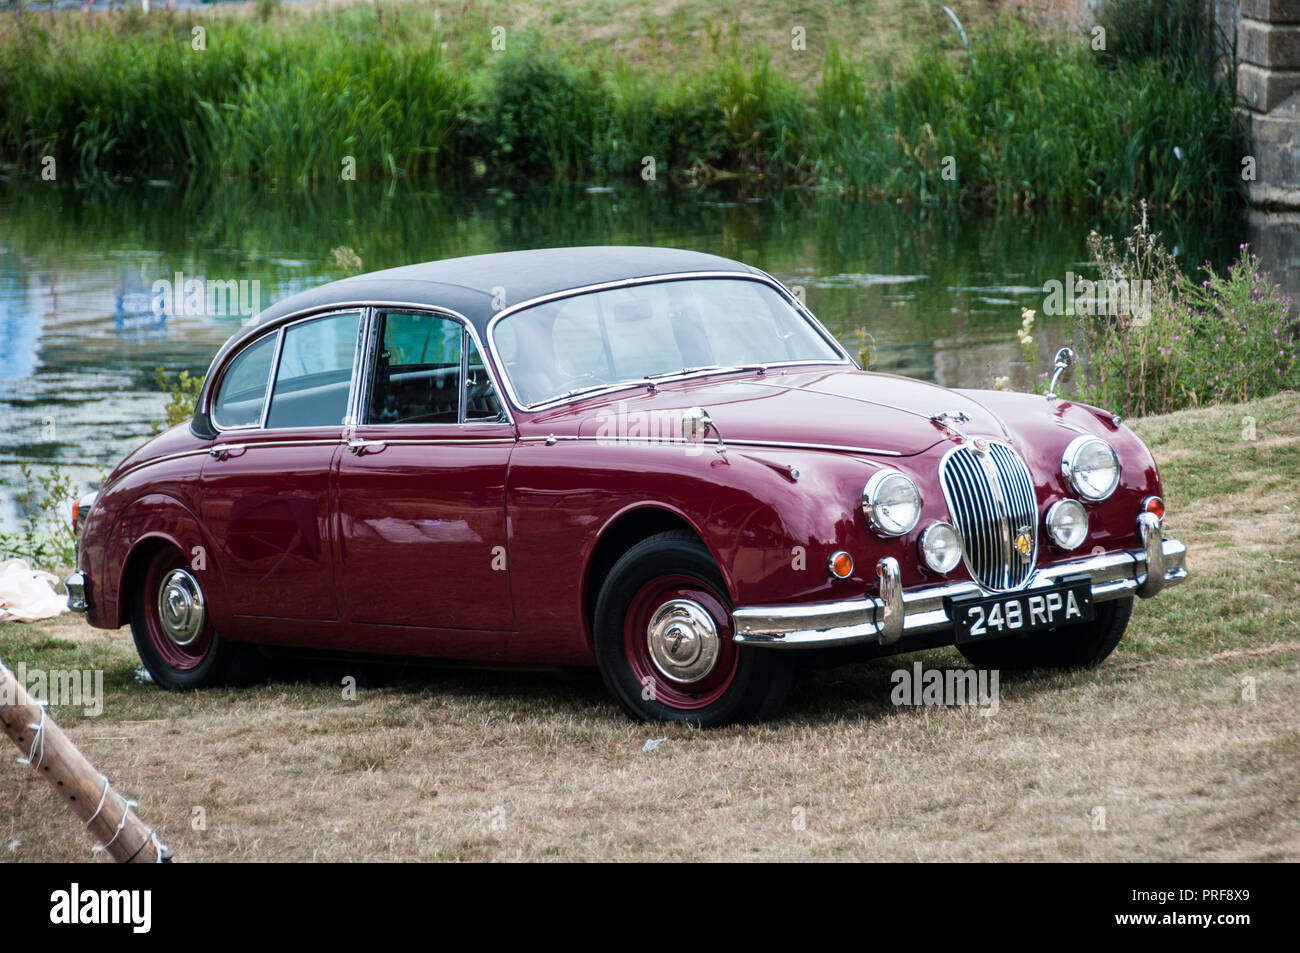 CAround the UK - Countryfile Live - The Jaguar car that was used in the TV series featuring John Thaw as Morse. Stock Photo